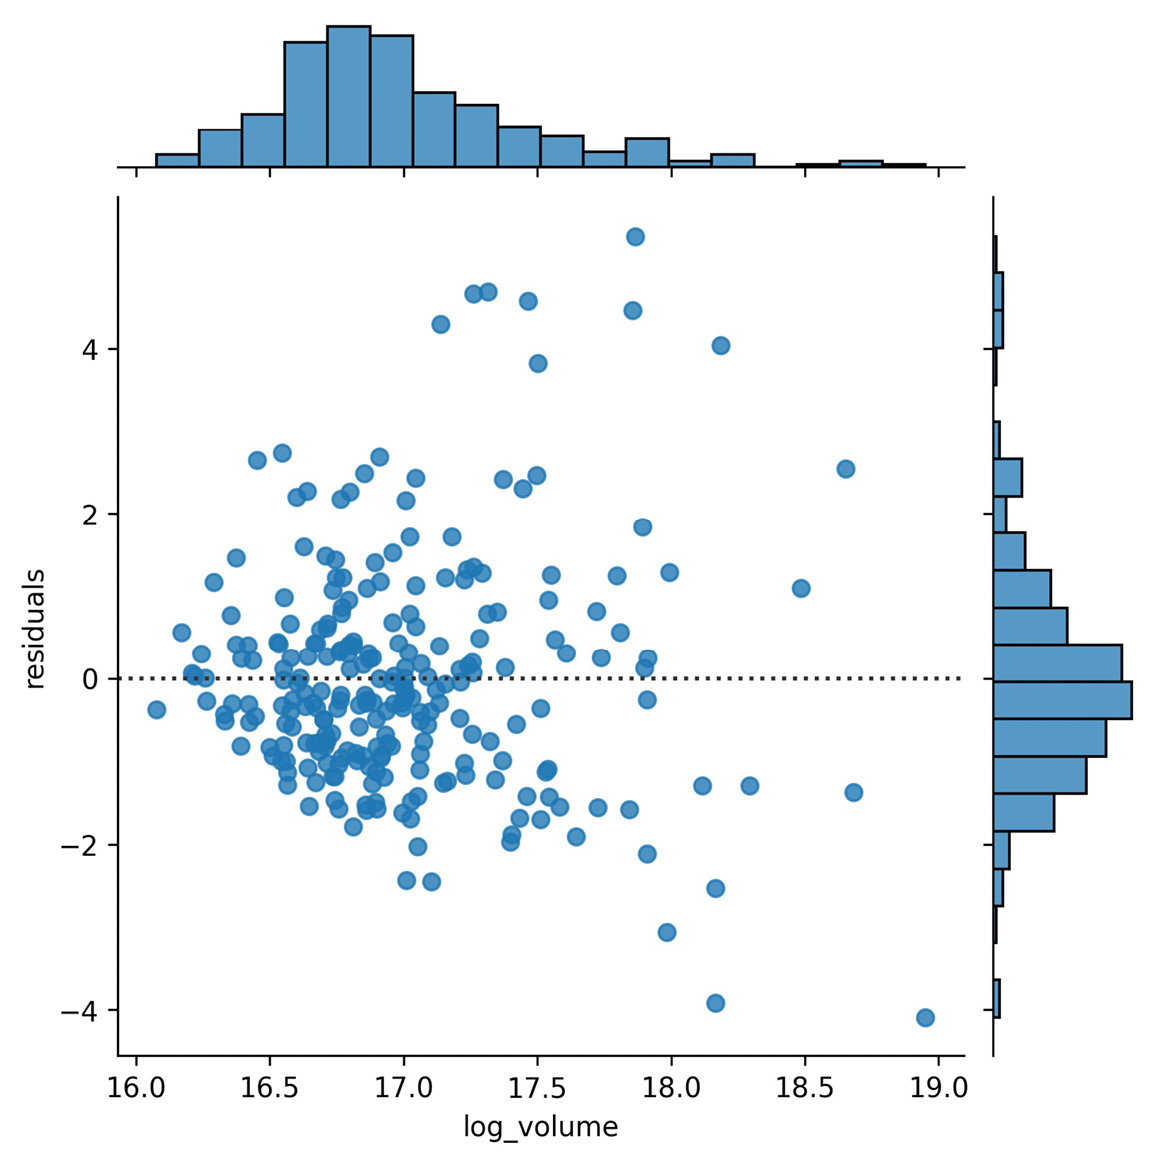 Figure 6.12 – Joint plot showing linear regression residuals
